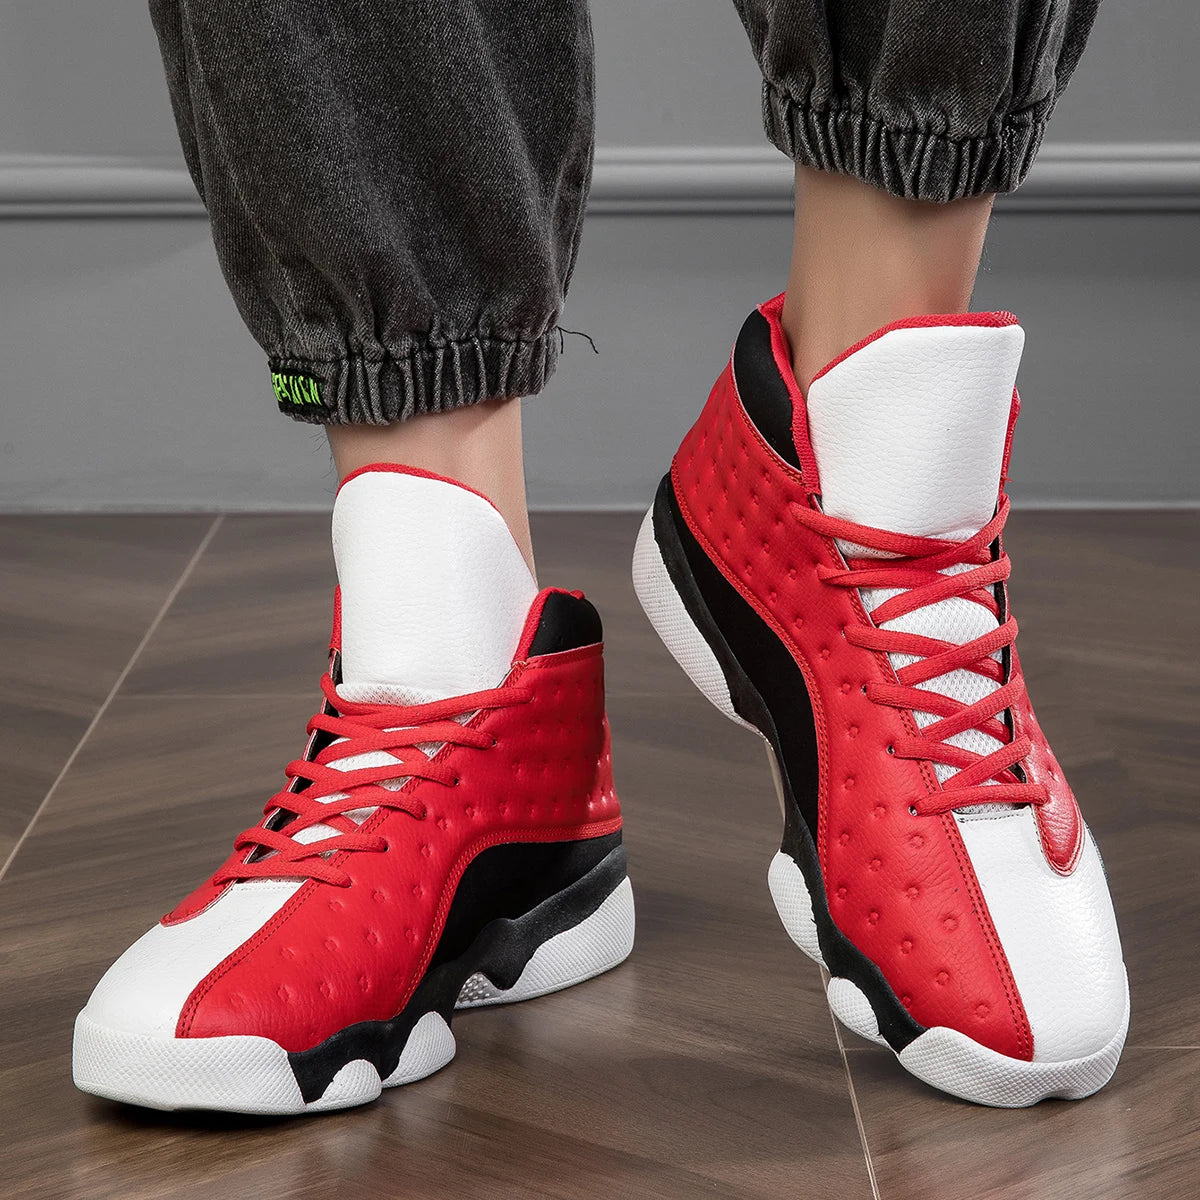 basketball shoes lovers shoes anti-skid wear